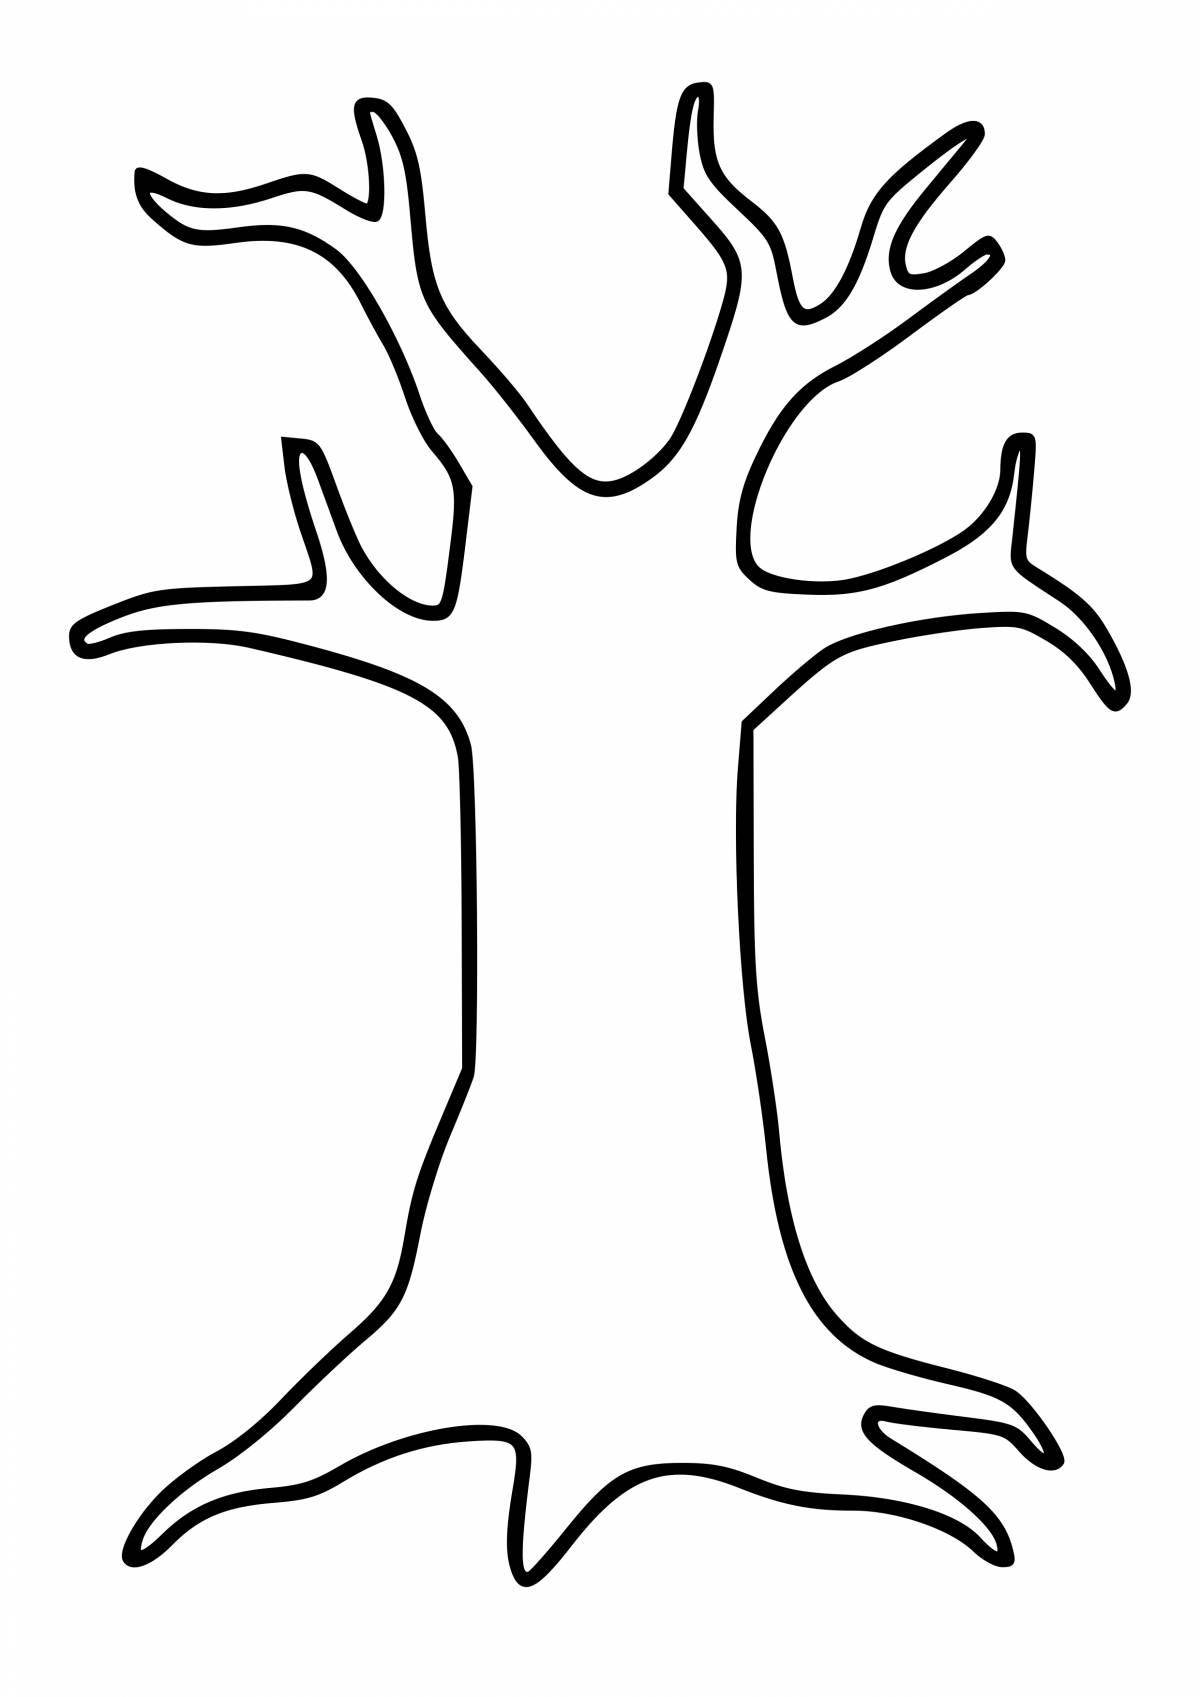 Tree without leaves outline #7